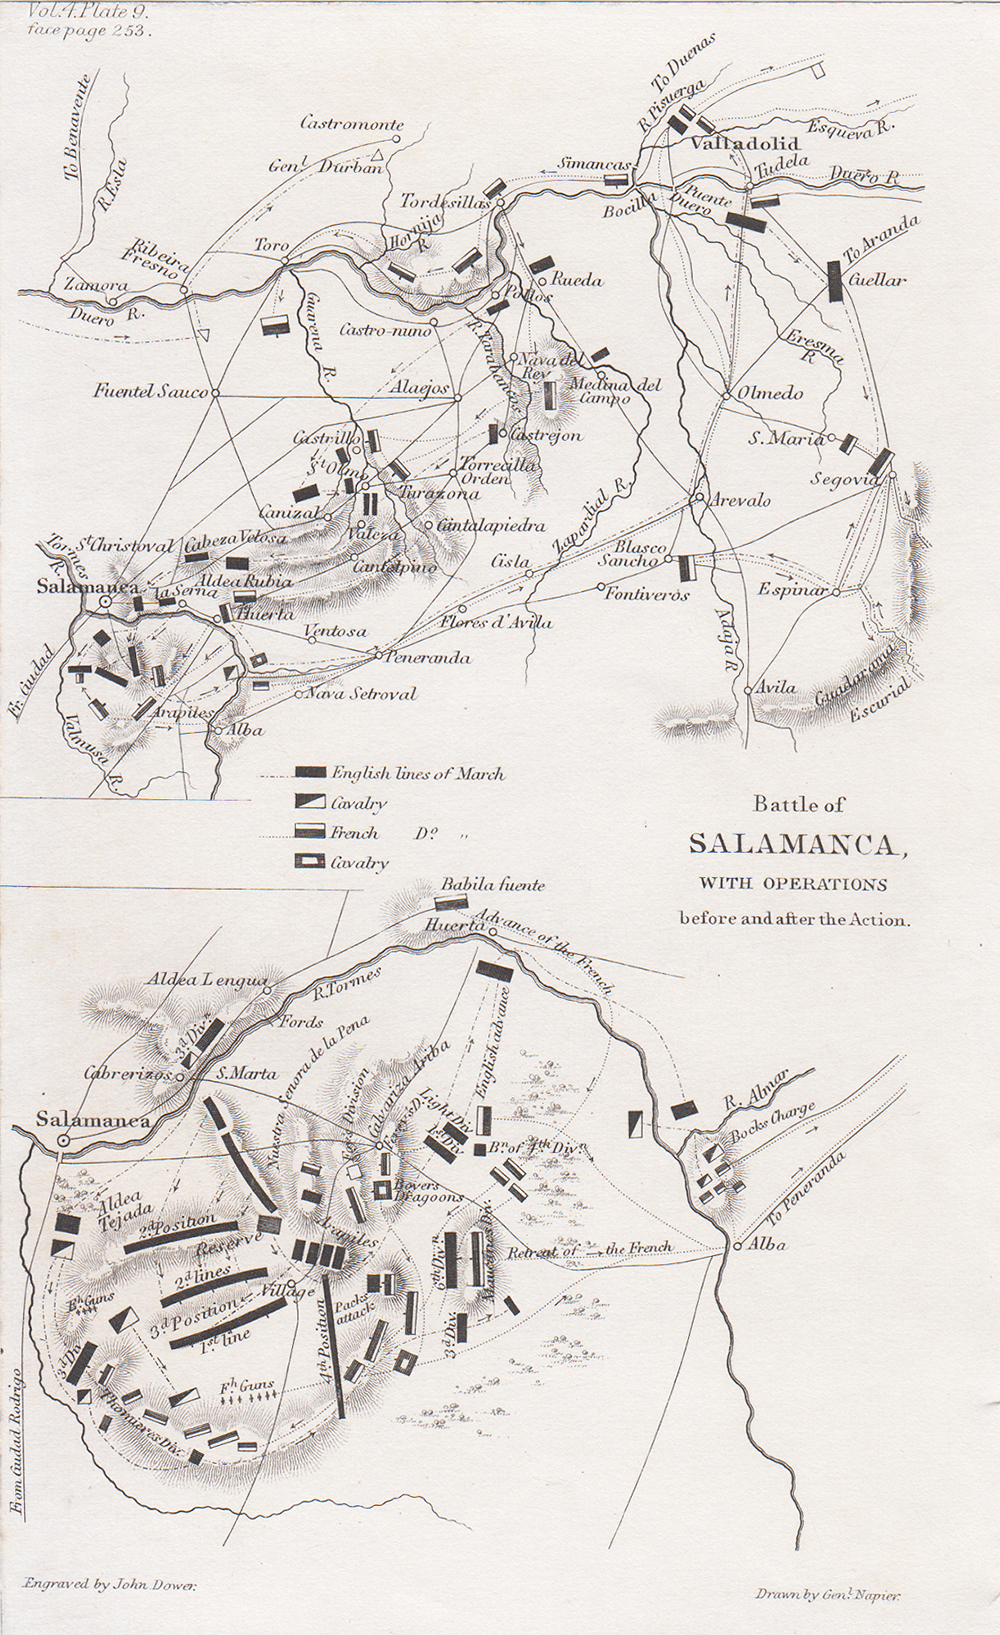 Battle of Salamanca with operations before and after the Action